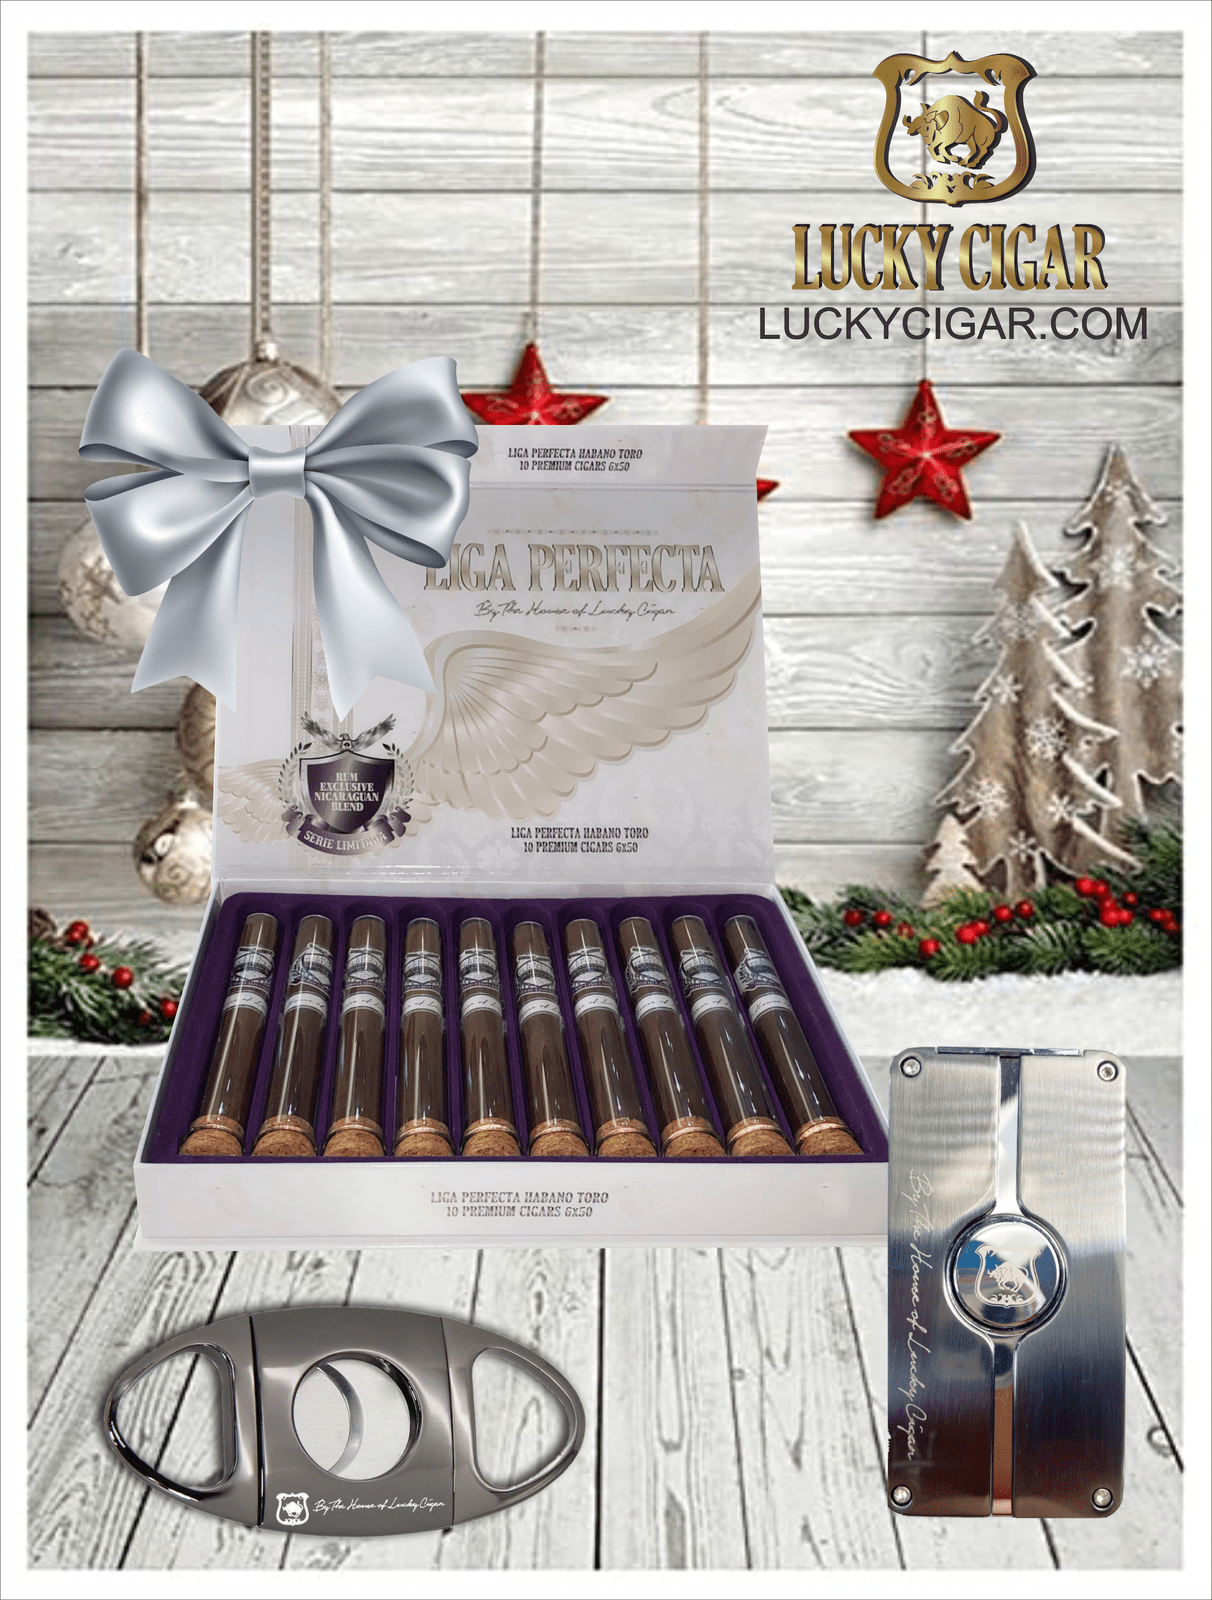 Cigar Gift Sets: Liga Perfecta 7x50 Box of 10 with Cutter, Torch